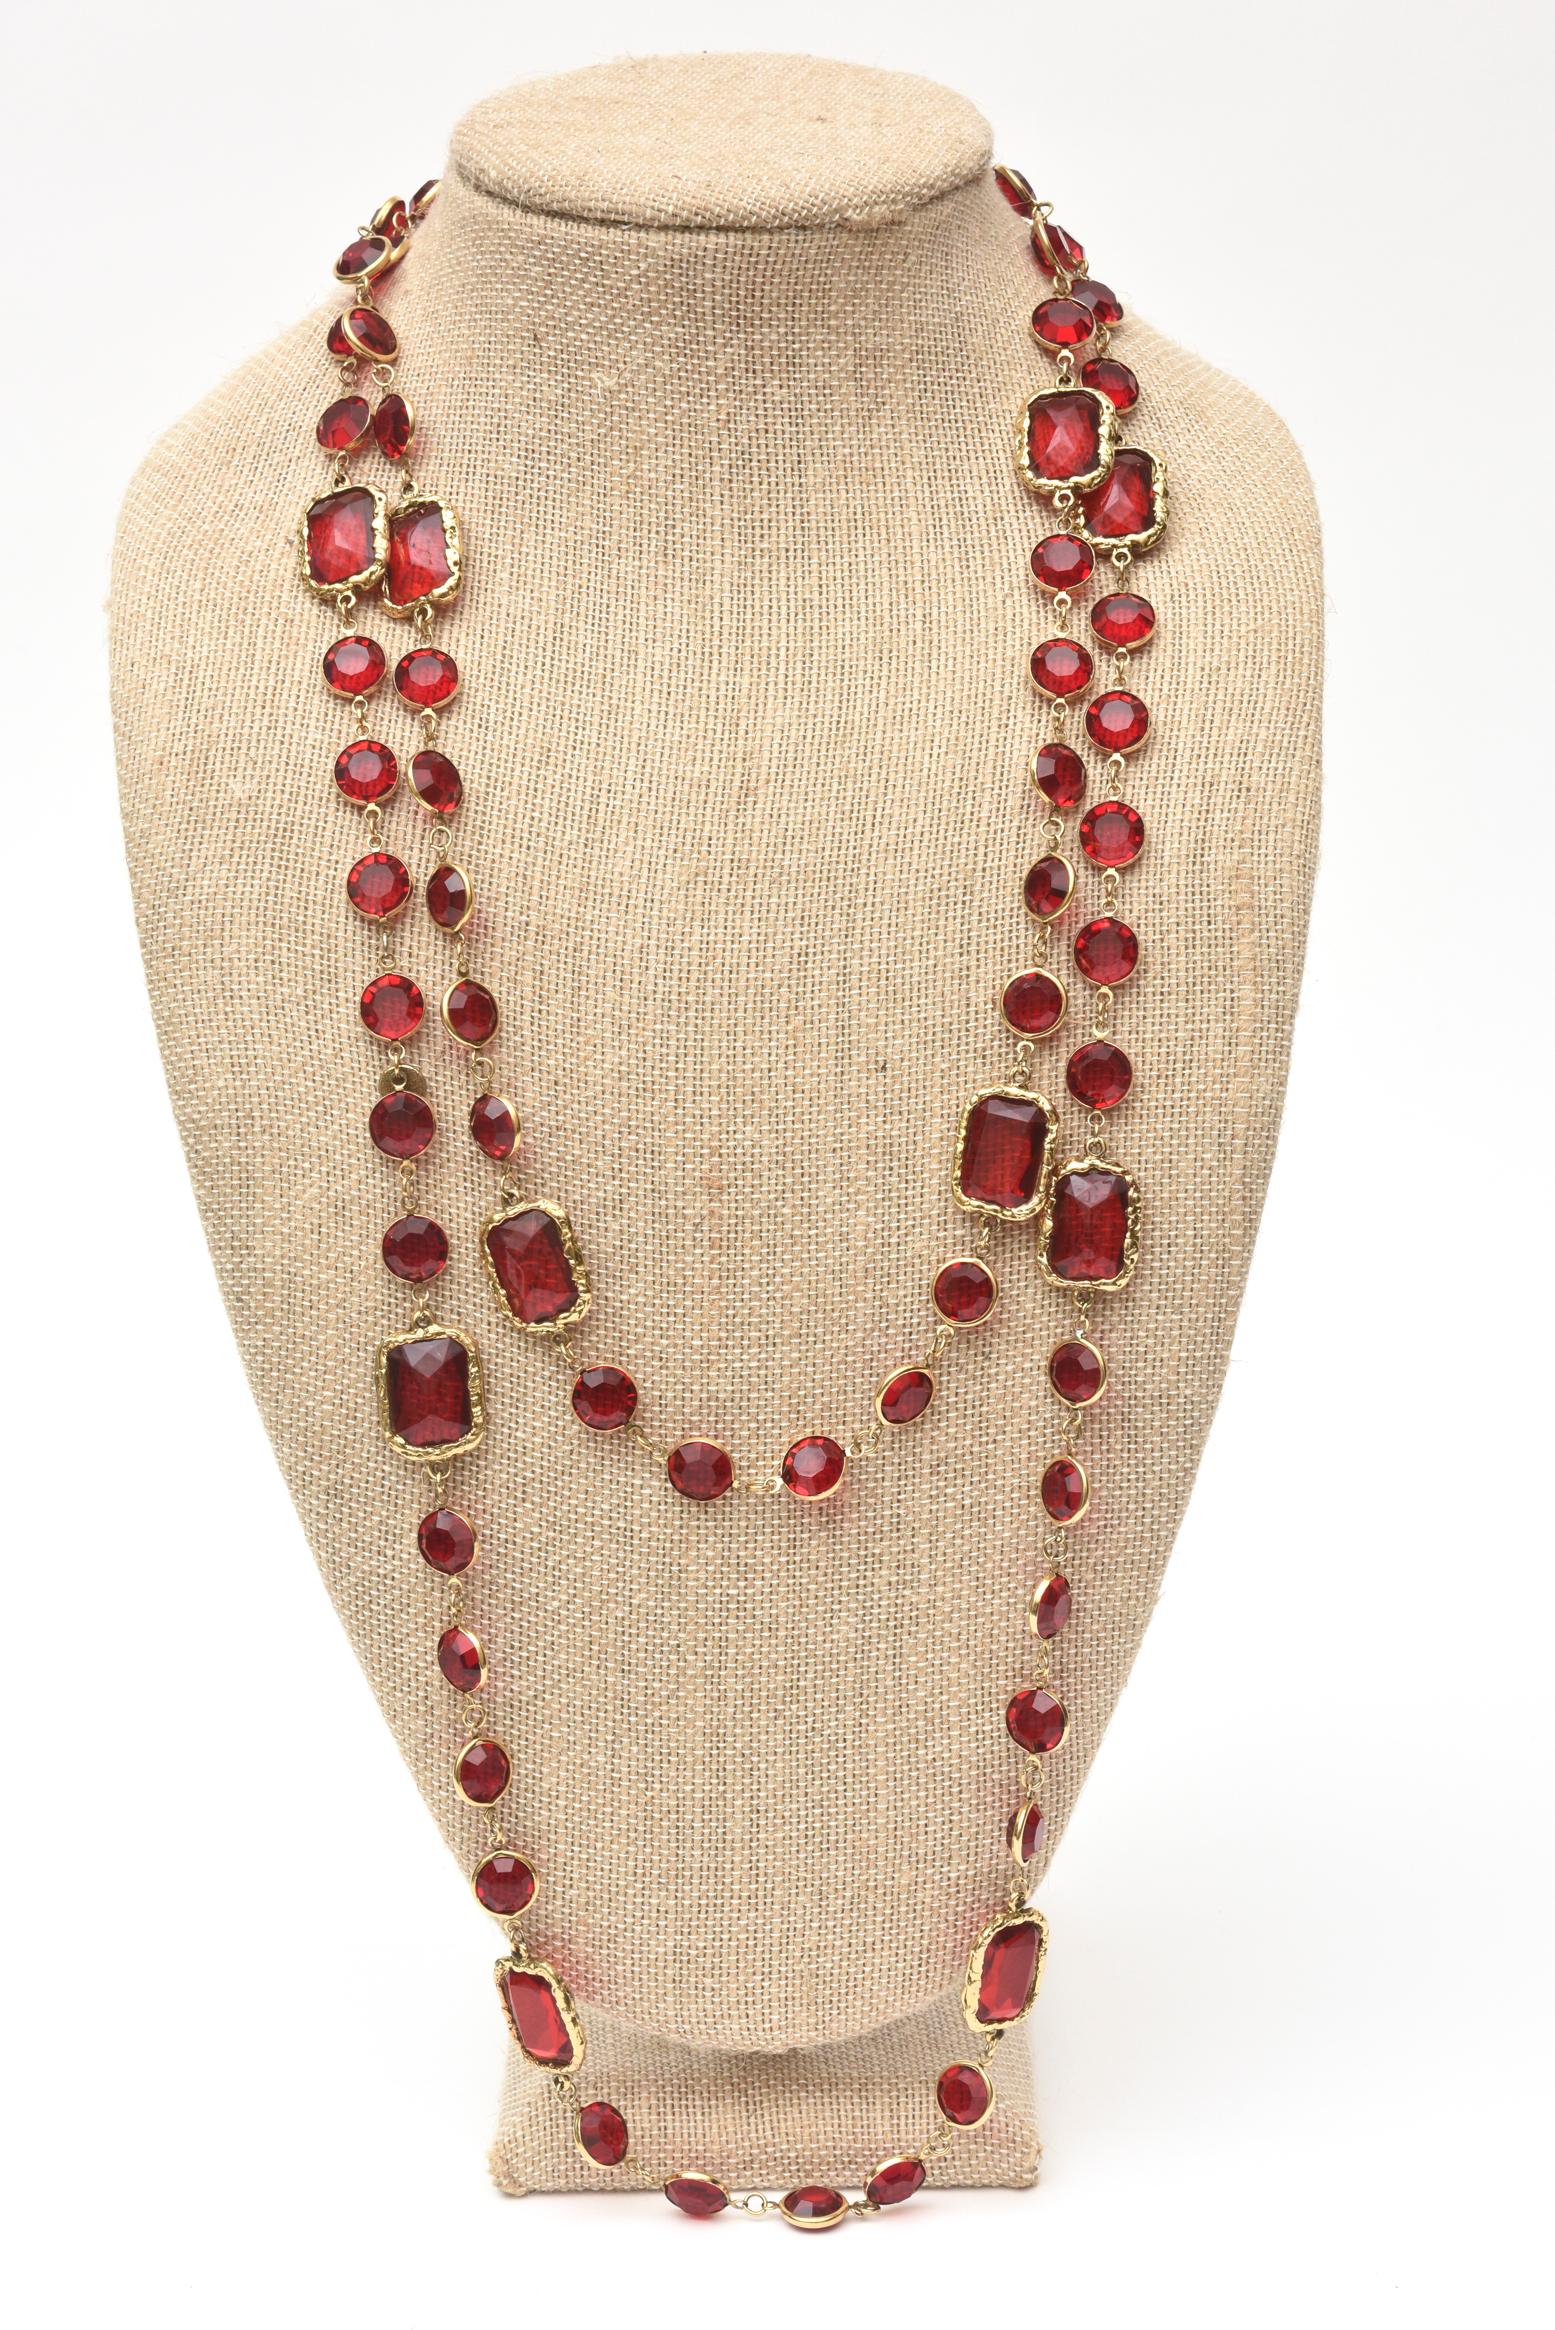 Chanel Ruby Red Crystal Chicklet Sautoir Necklace Vintage 1